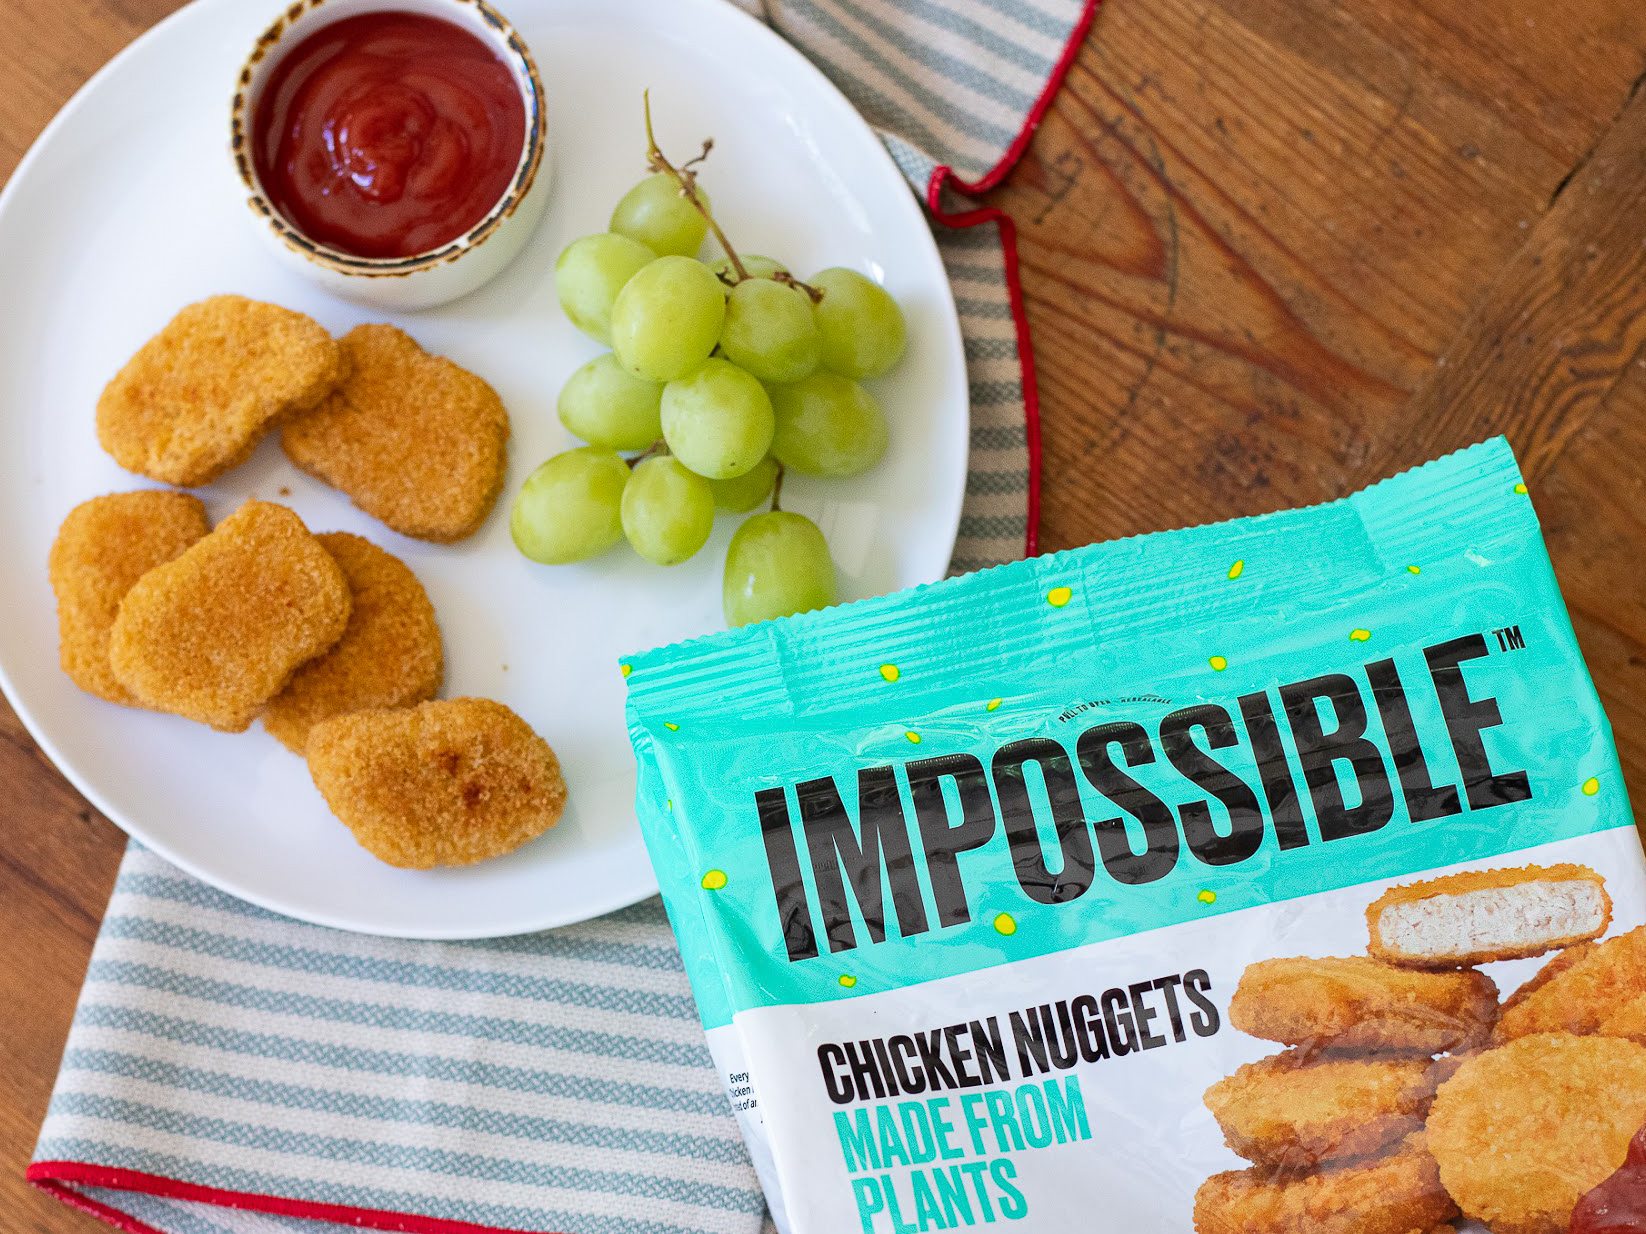 Impossible Plant Based Meatballs Or Chicken Nuggets Only $3.49 At Kroger (Regular Price $7.99)